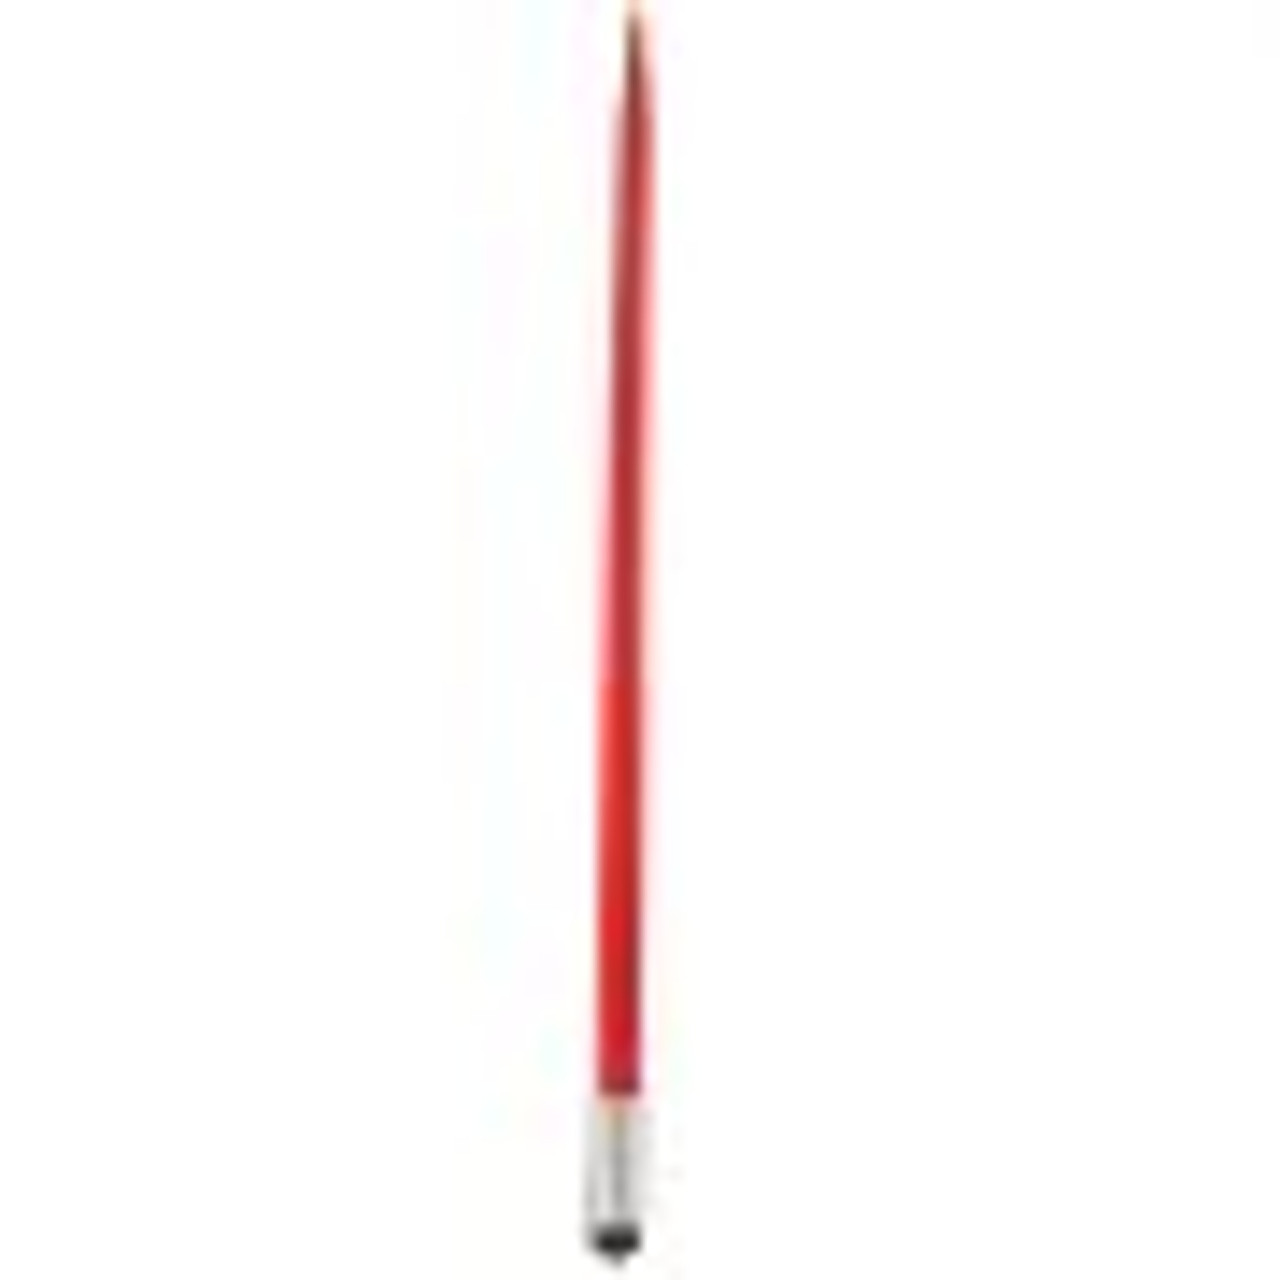 Hay Spear 49" Bale Spear 4500 lbs Capacity, Bale Spike Quick Attach Square Hay Bale Spears 1 3/4" wide, Red Coated Bale Forks, Bale Hay Spike with Hex Nut & Sleeve for Buckets Tractors Loaders